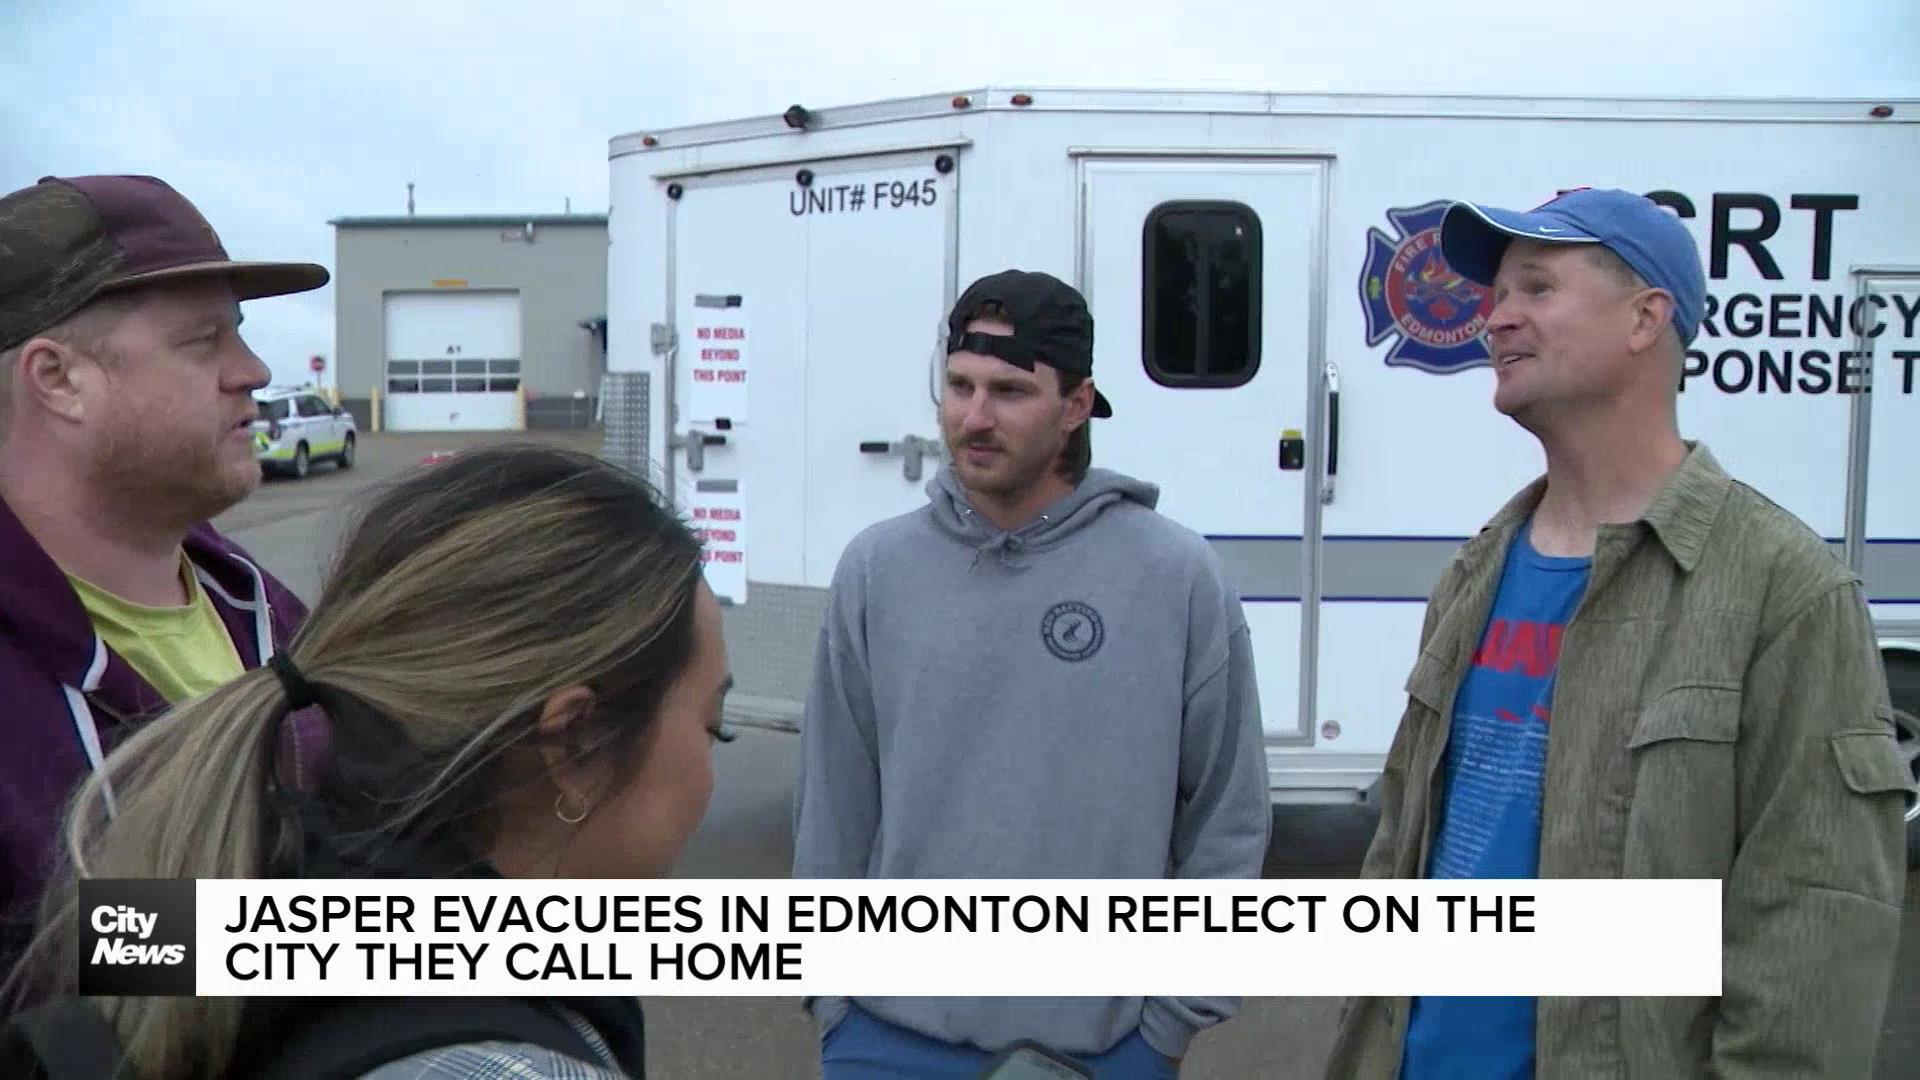 Evacuees in Edmonton reflect on Jasper means to them